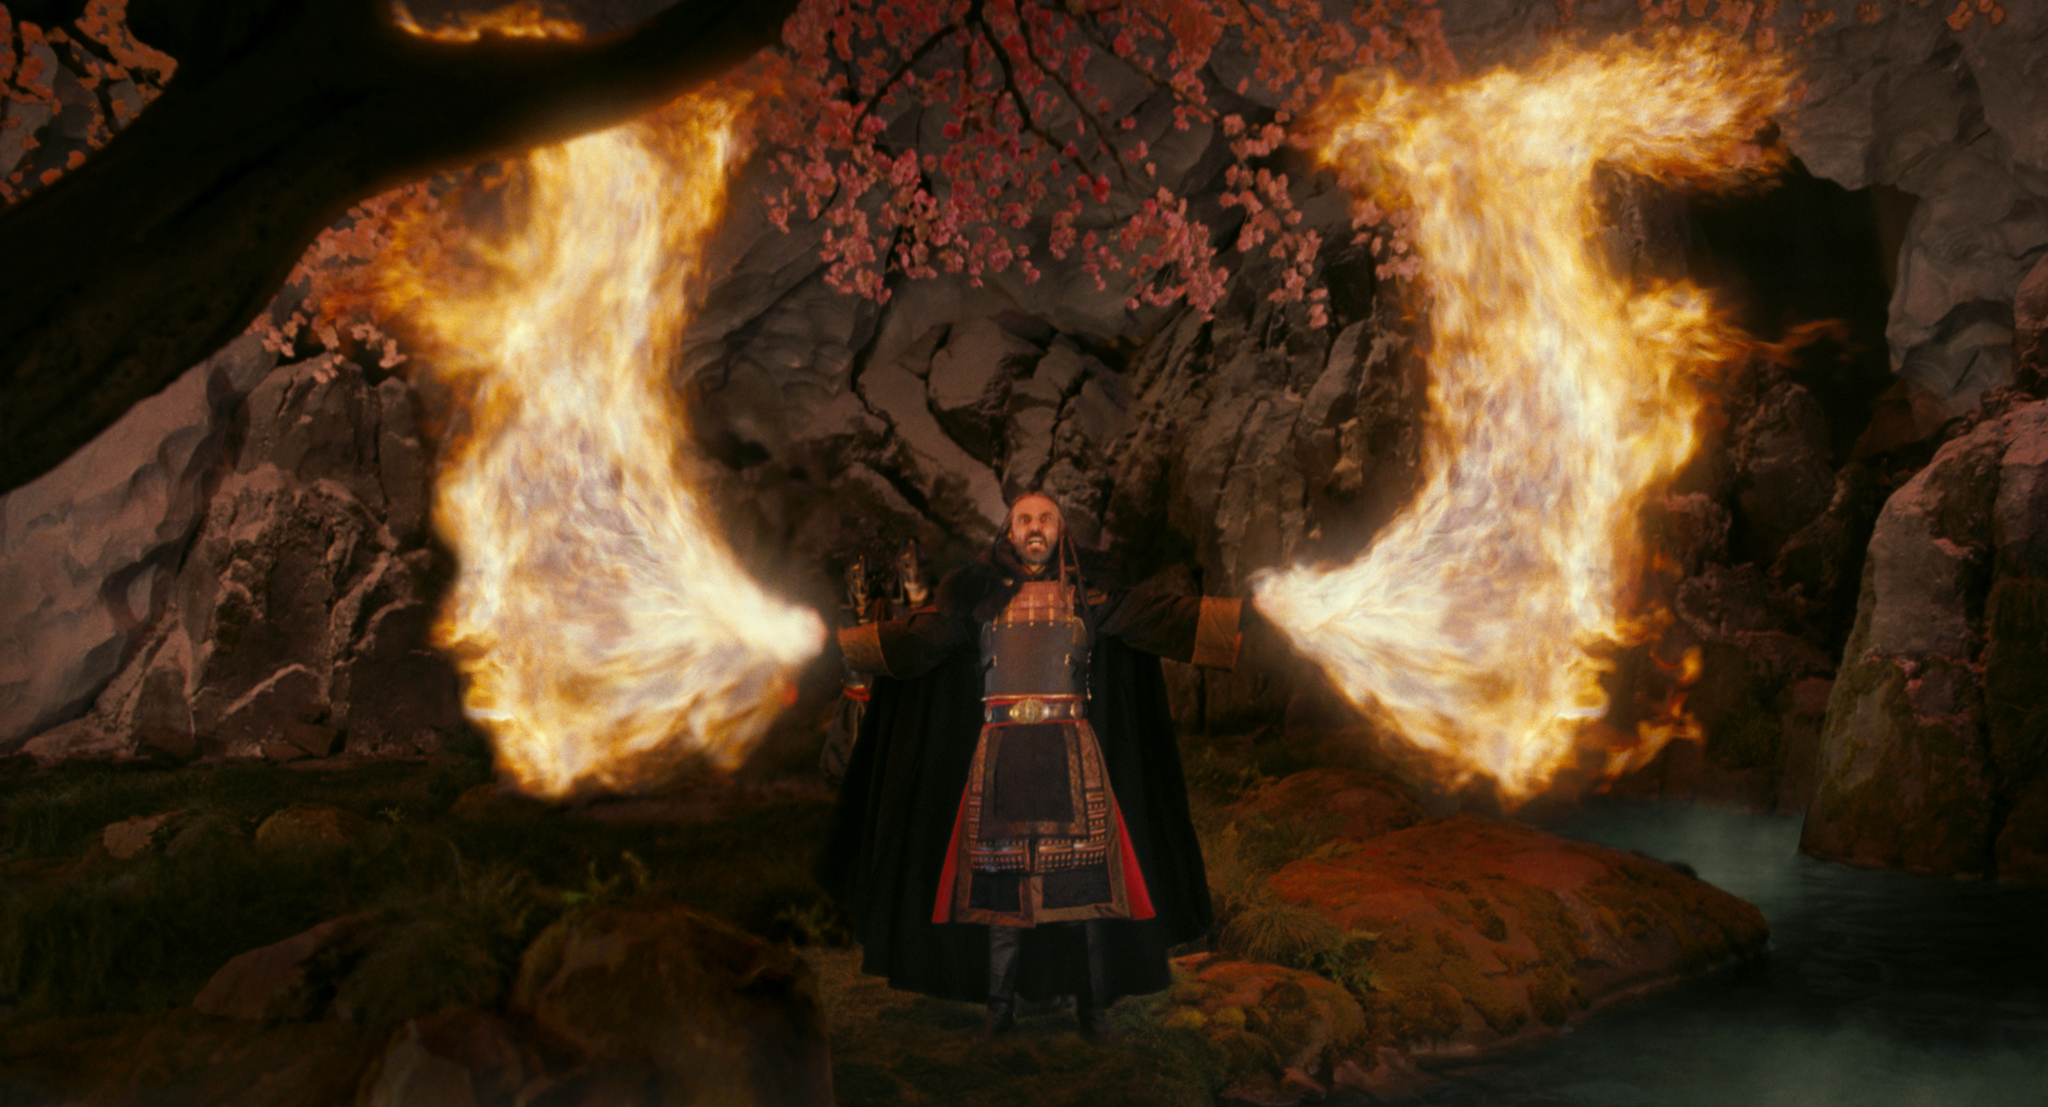 Shaun Toub as Uncle Iroh spreads his arms as flames roar from his hands in huge fiery wings in The Last Airbender (2010).